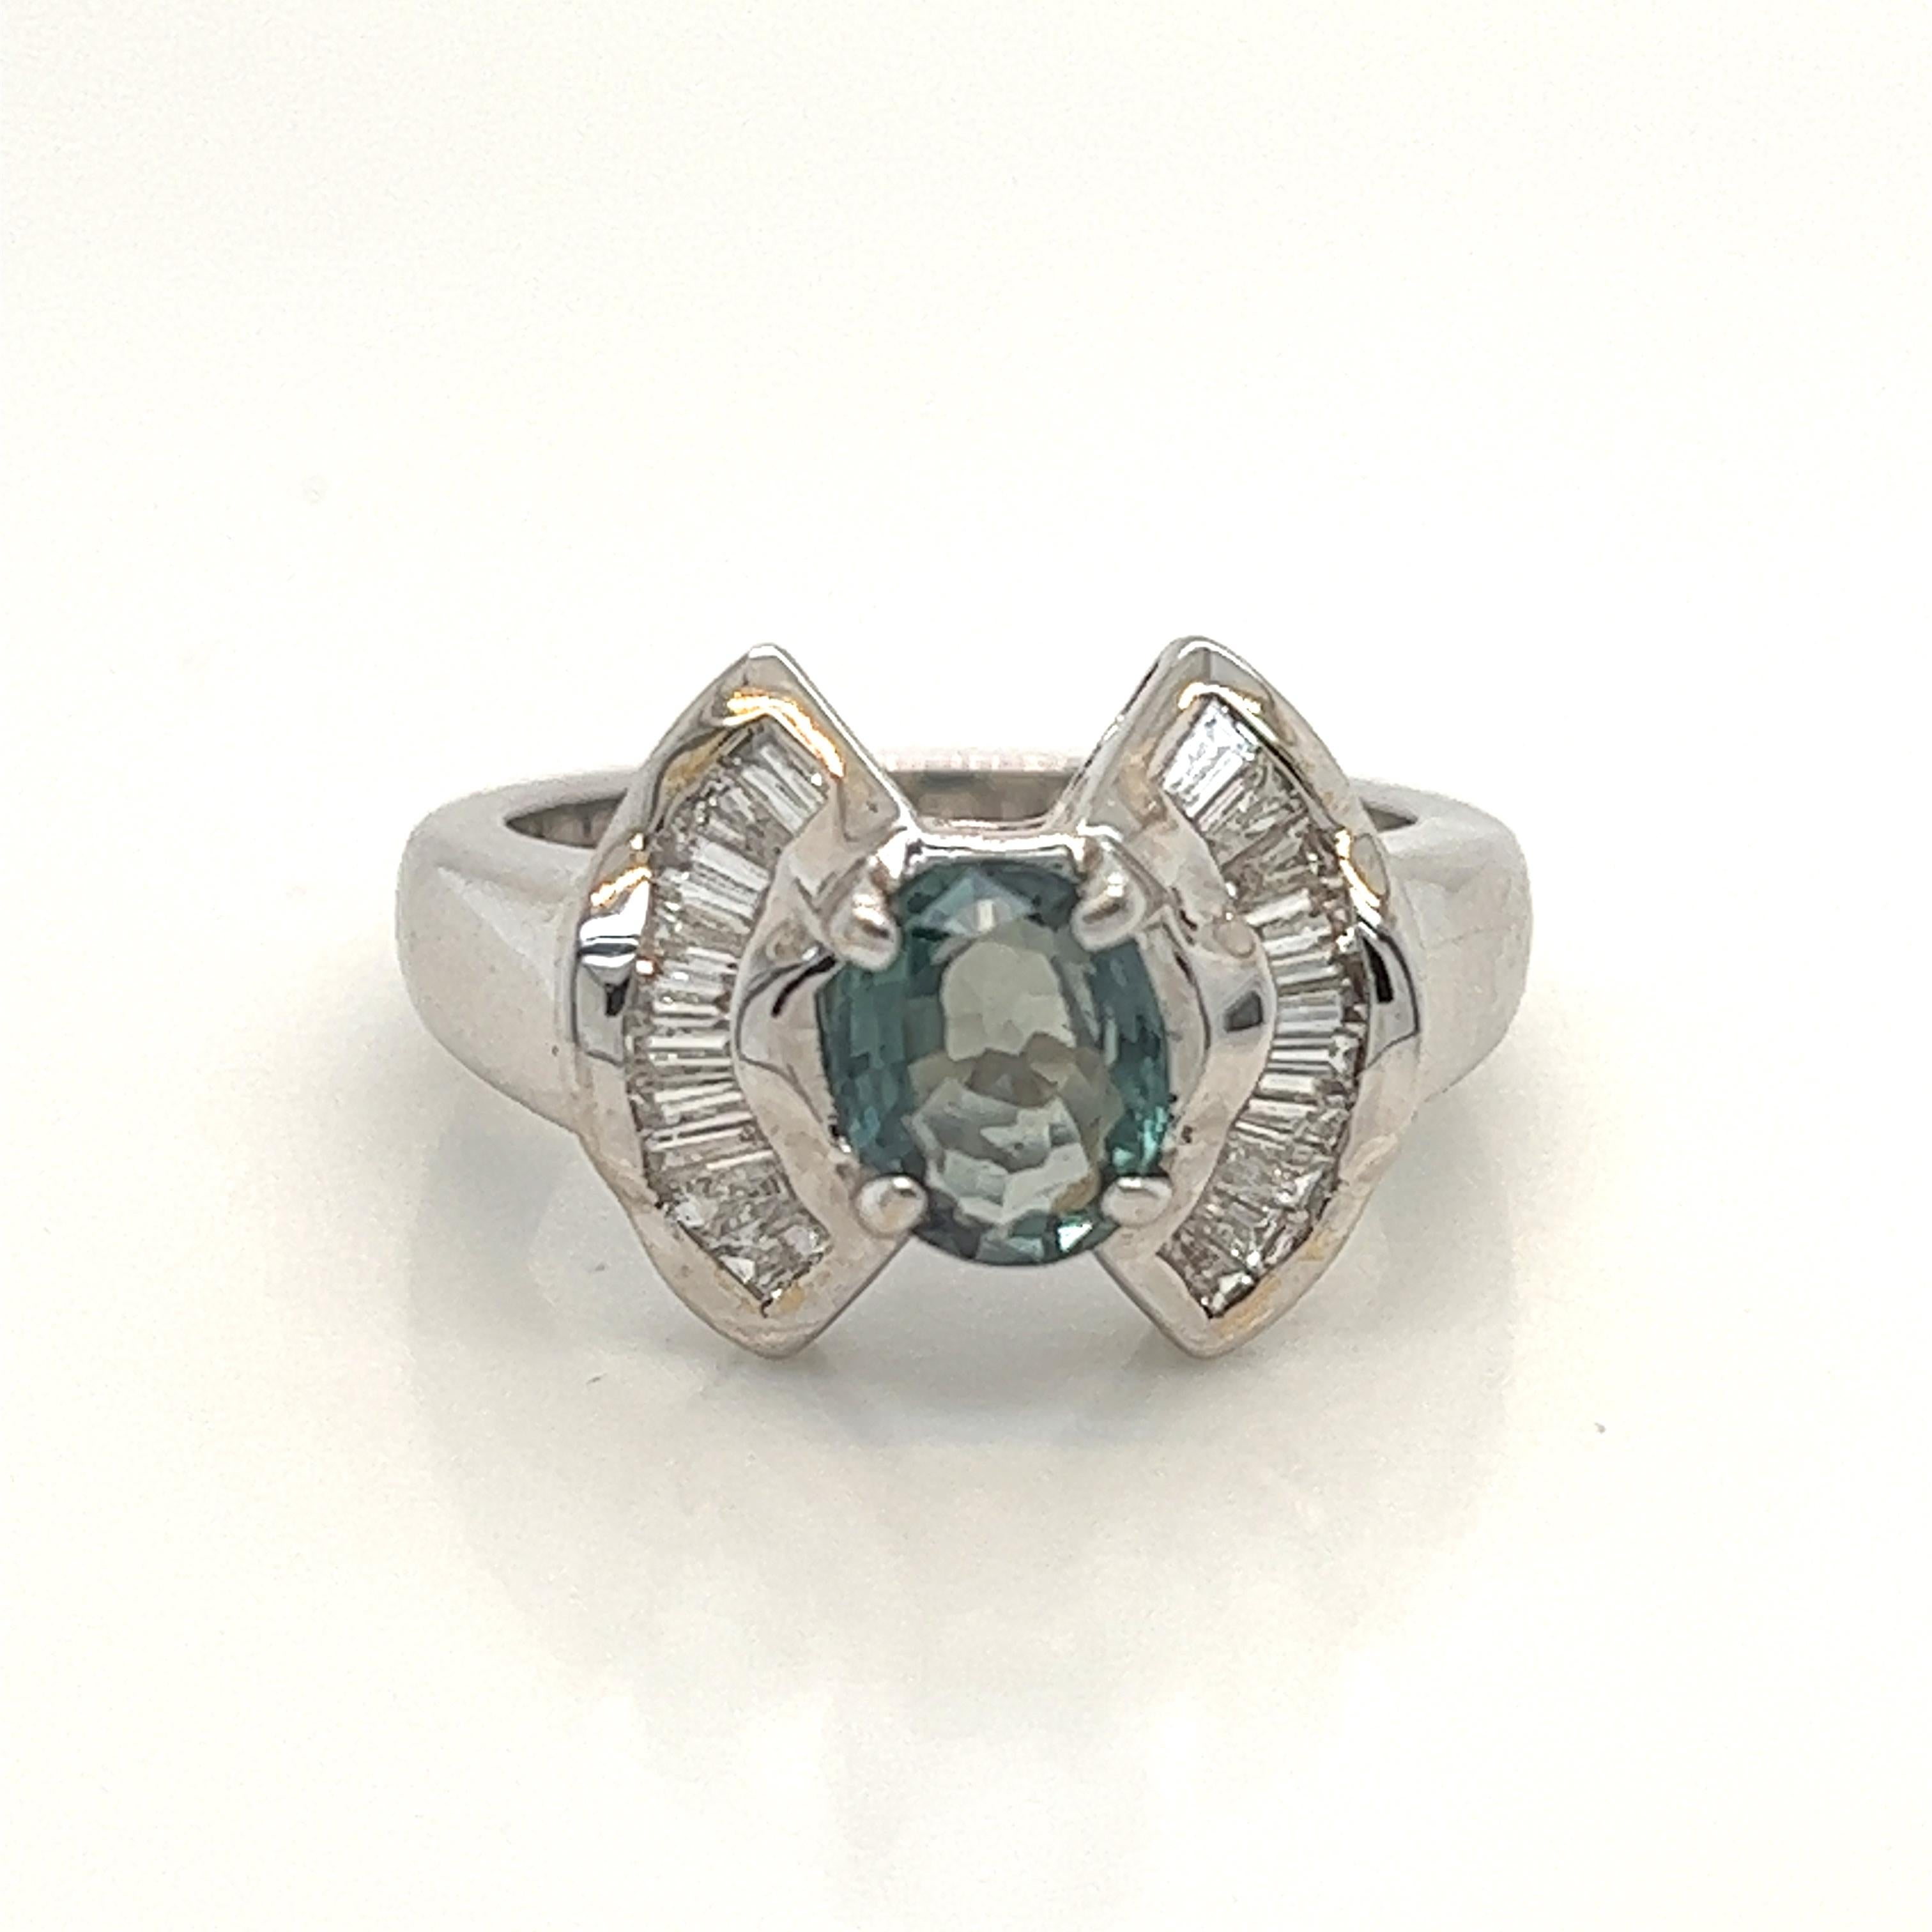 This is a gorgeous natural AAA quality Oval Alexandrite with Baguette diamonds that is set in solid 18K white gold. This ring features a natural 1.49 carat oval alexandrite that is certified by the Gemological Institute of America (GIA). The ring is